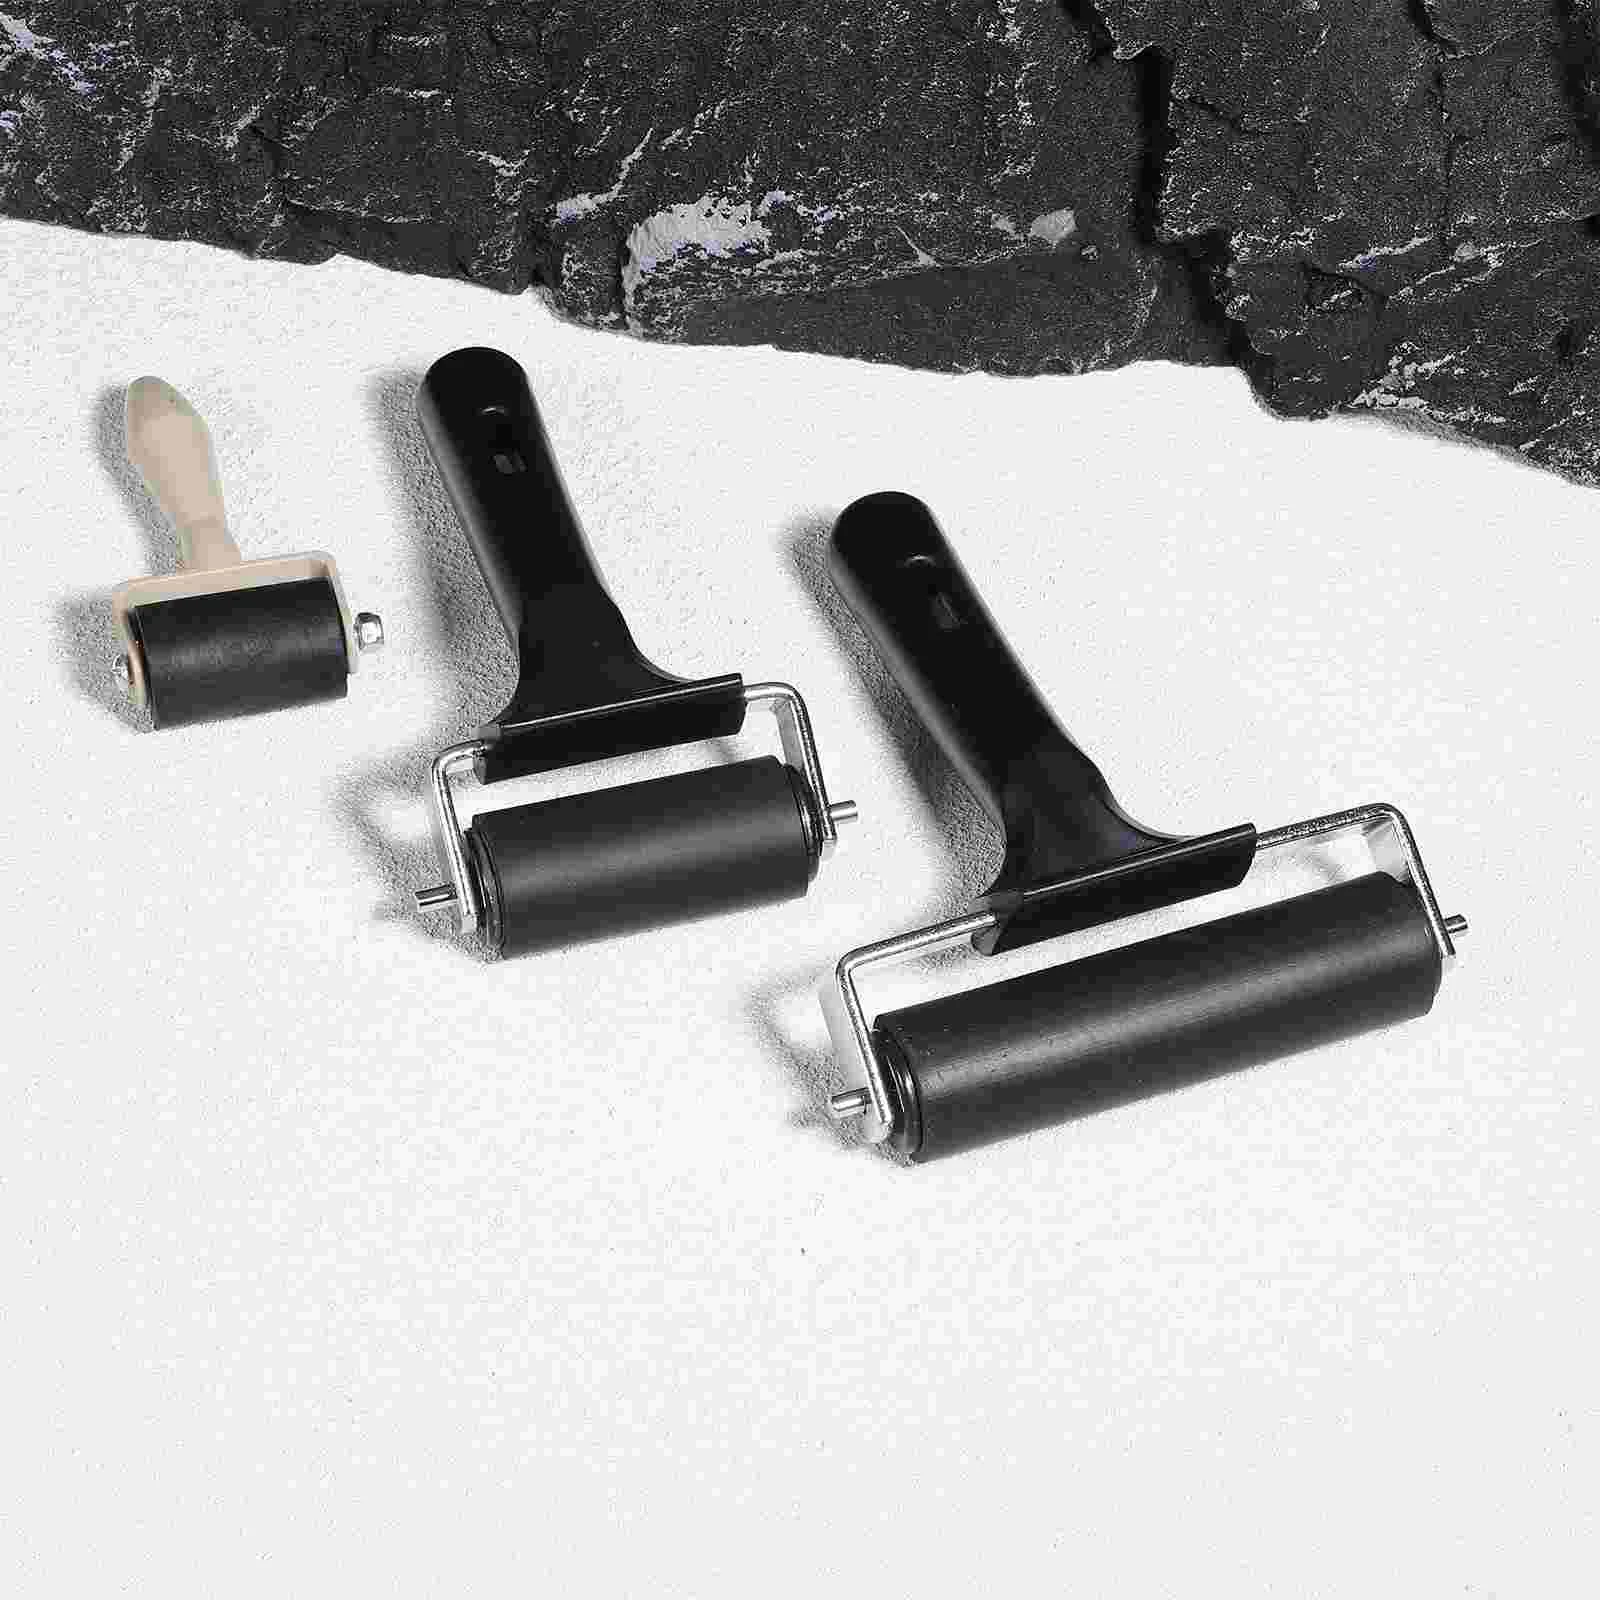 

3 Pcs Printmaking Tool Roller Ink Stamping Tools Brayer Craft Rollers Manual for Painting Wallpaper Plastic Child Crafts